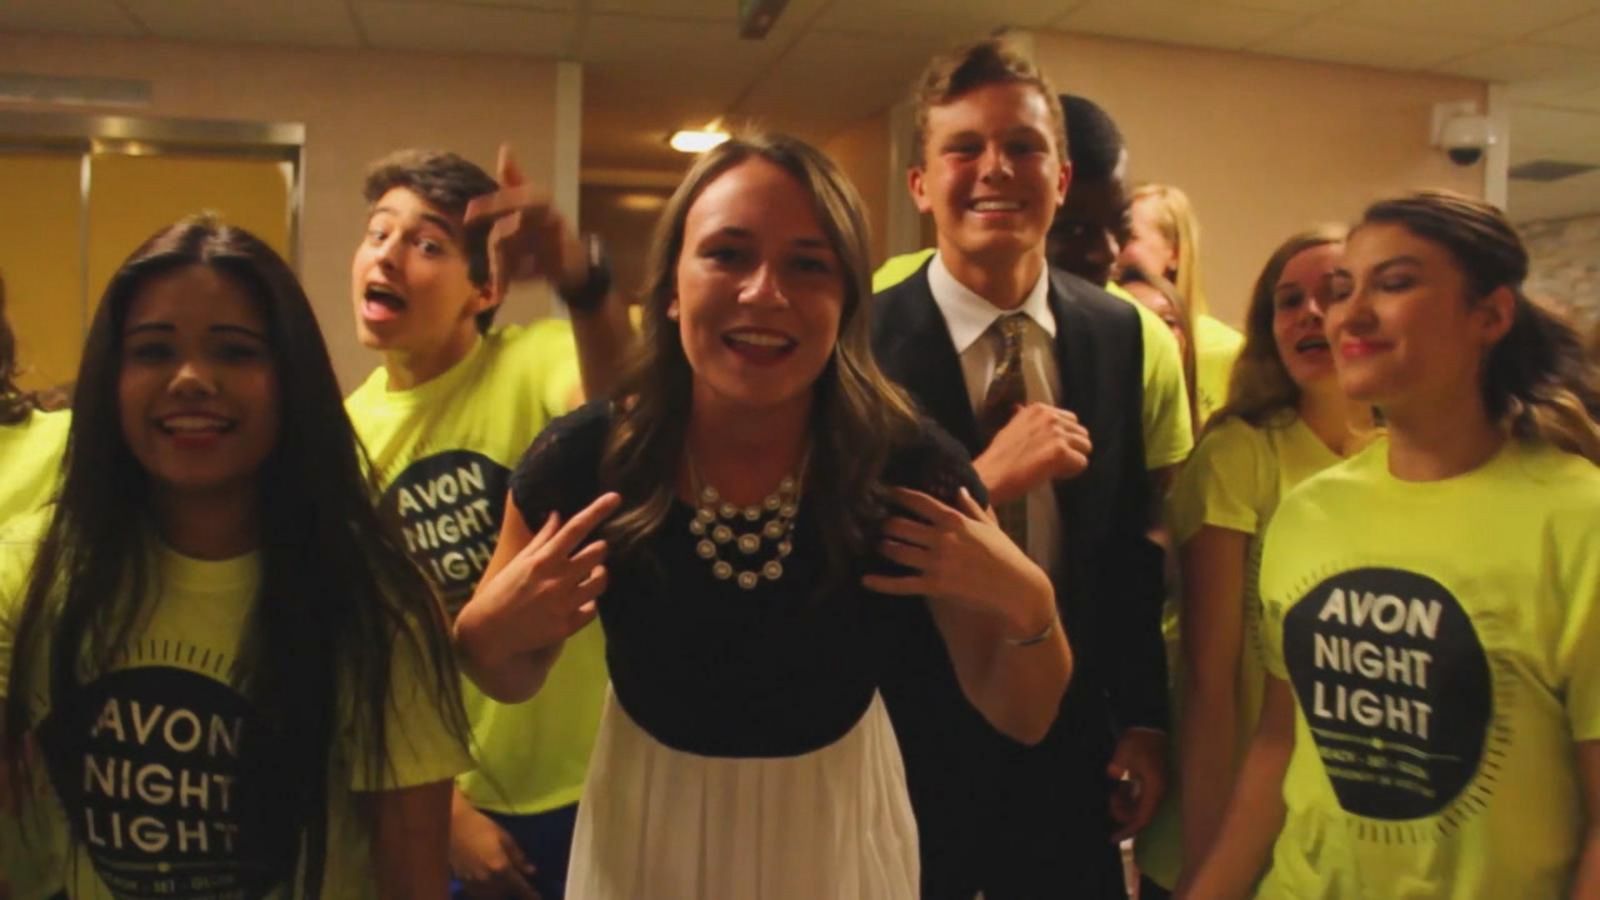 Indiana High School Students Make Viral Video to Raise Money for Prenatal Care